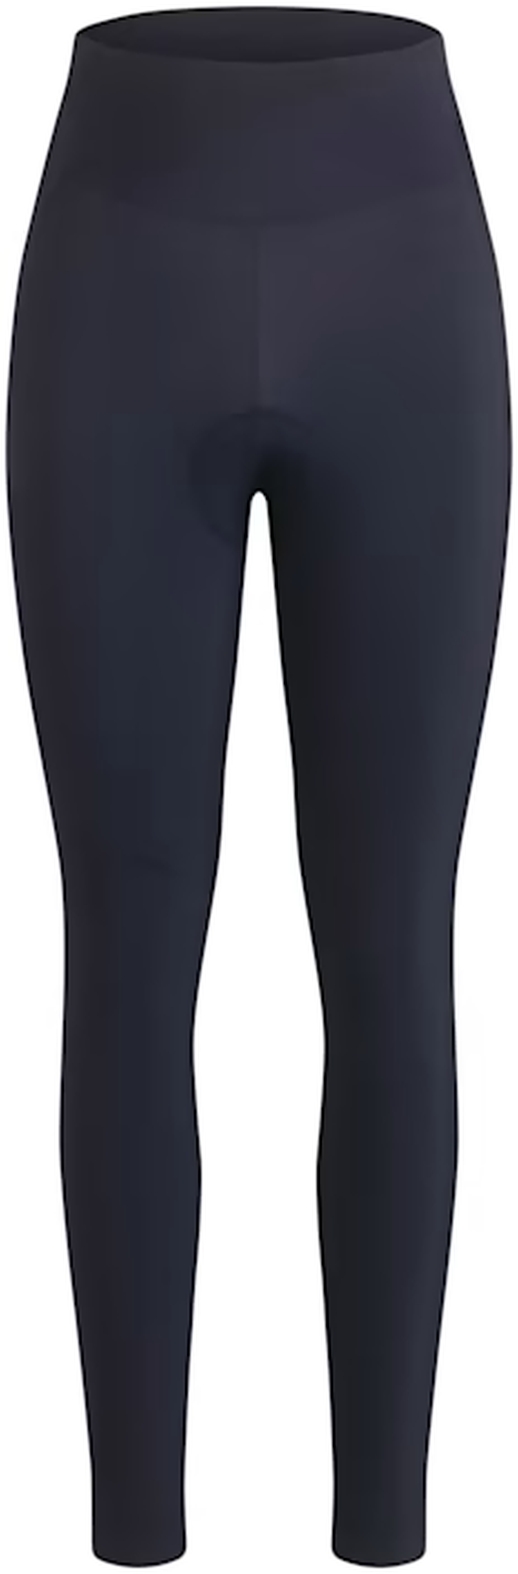 E-shop Rapha Women's Classic Winter Tights with Pad - Dark Navy/White L